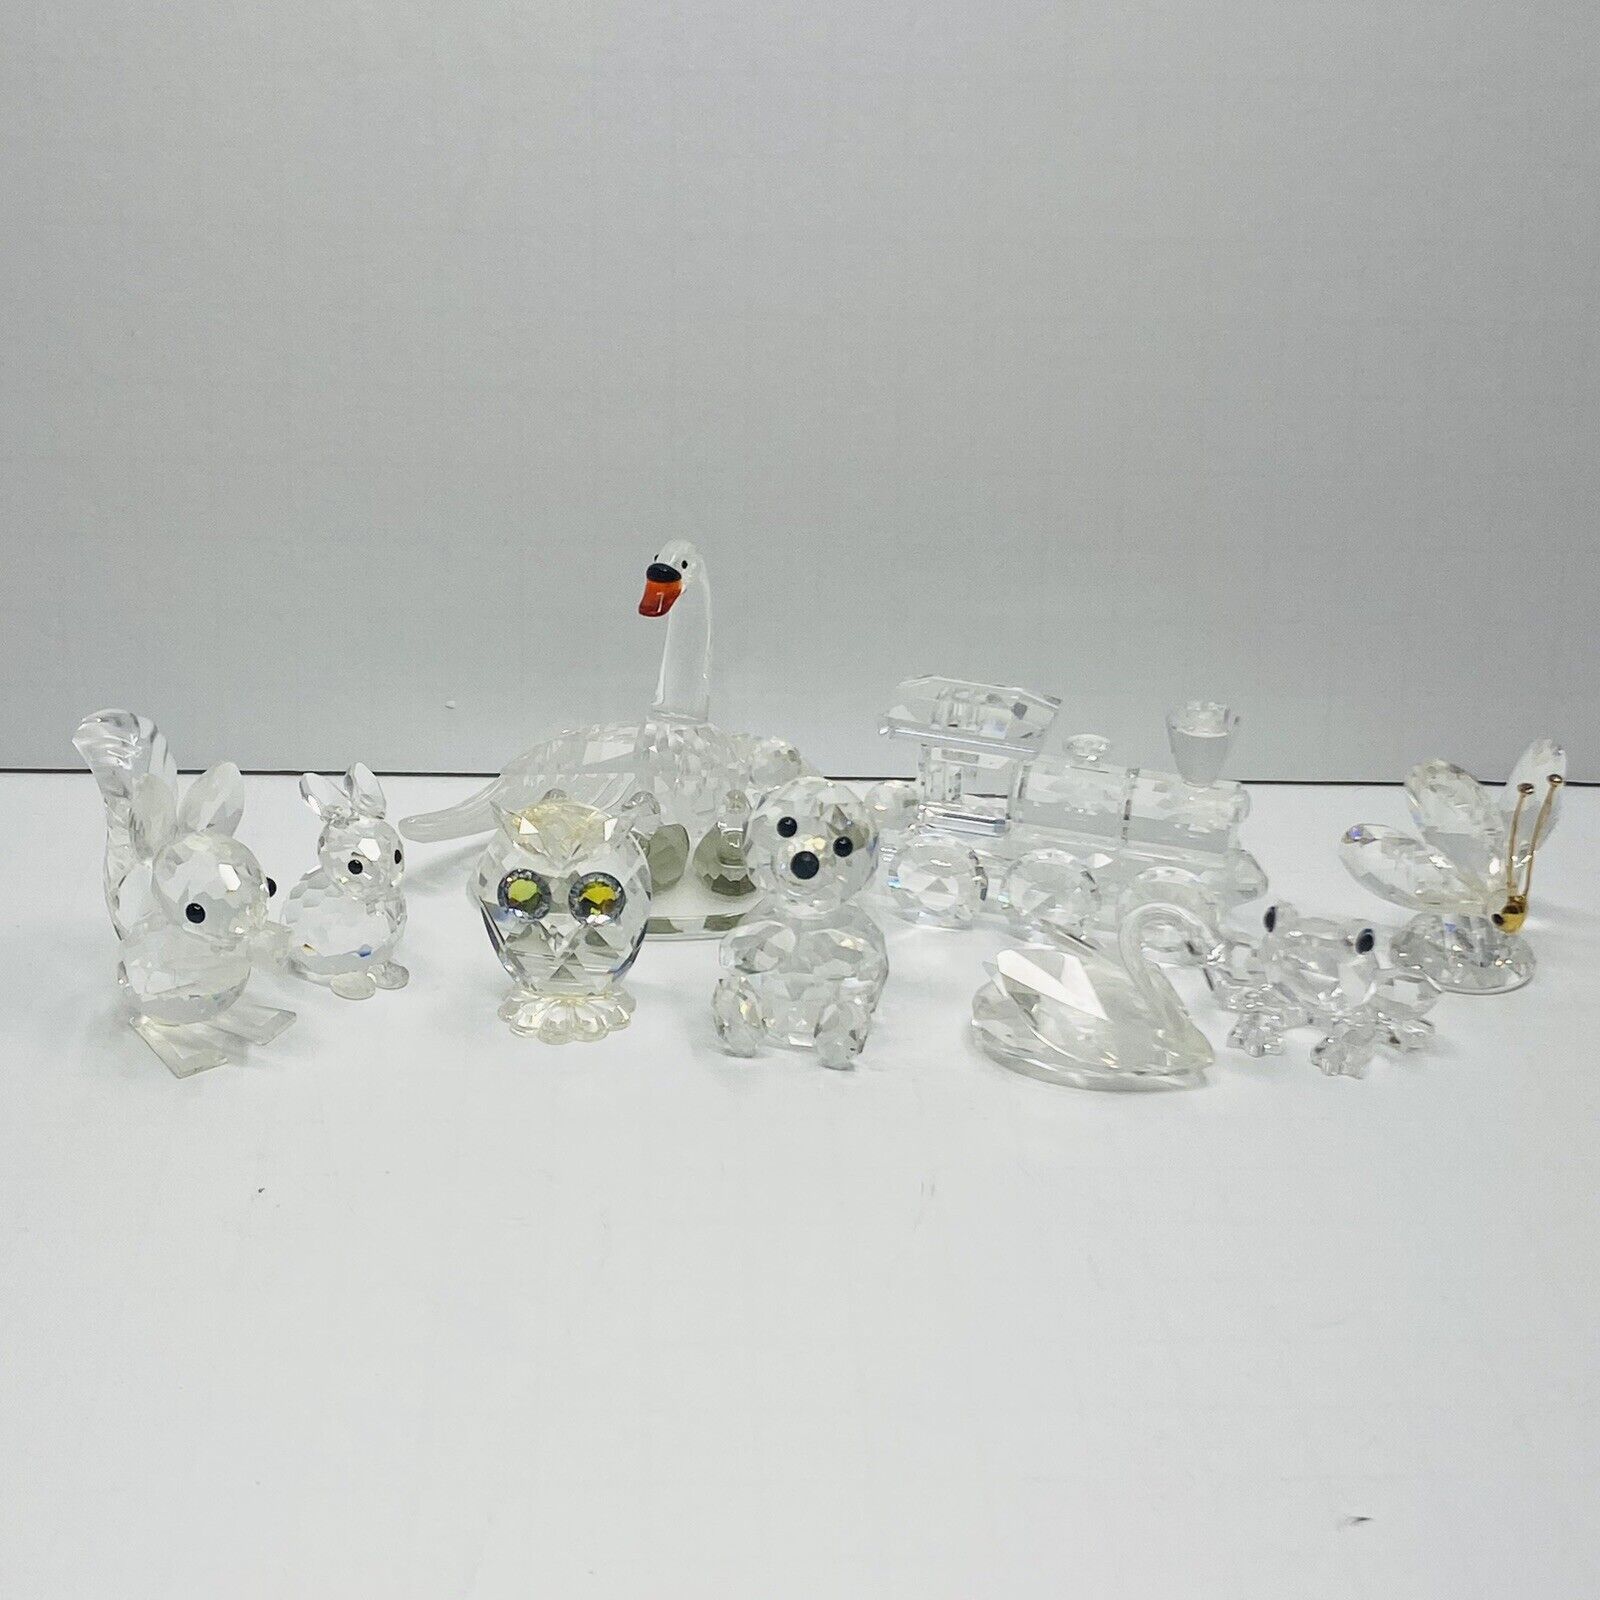 Swarovski Crystal Figurines Lot Of 9 With Boxes Animals Train